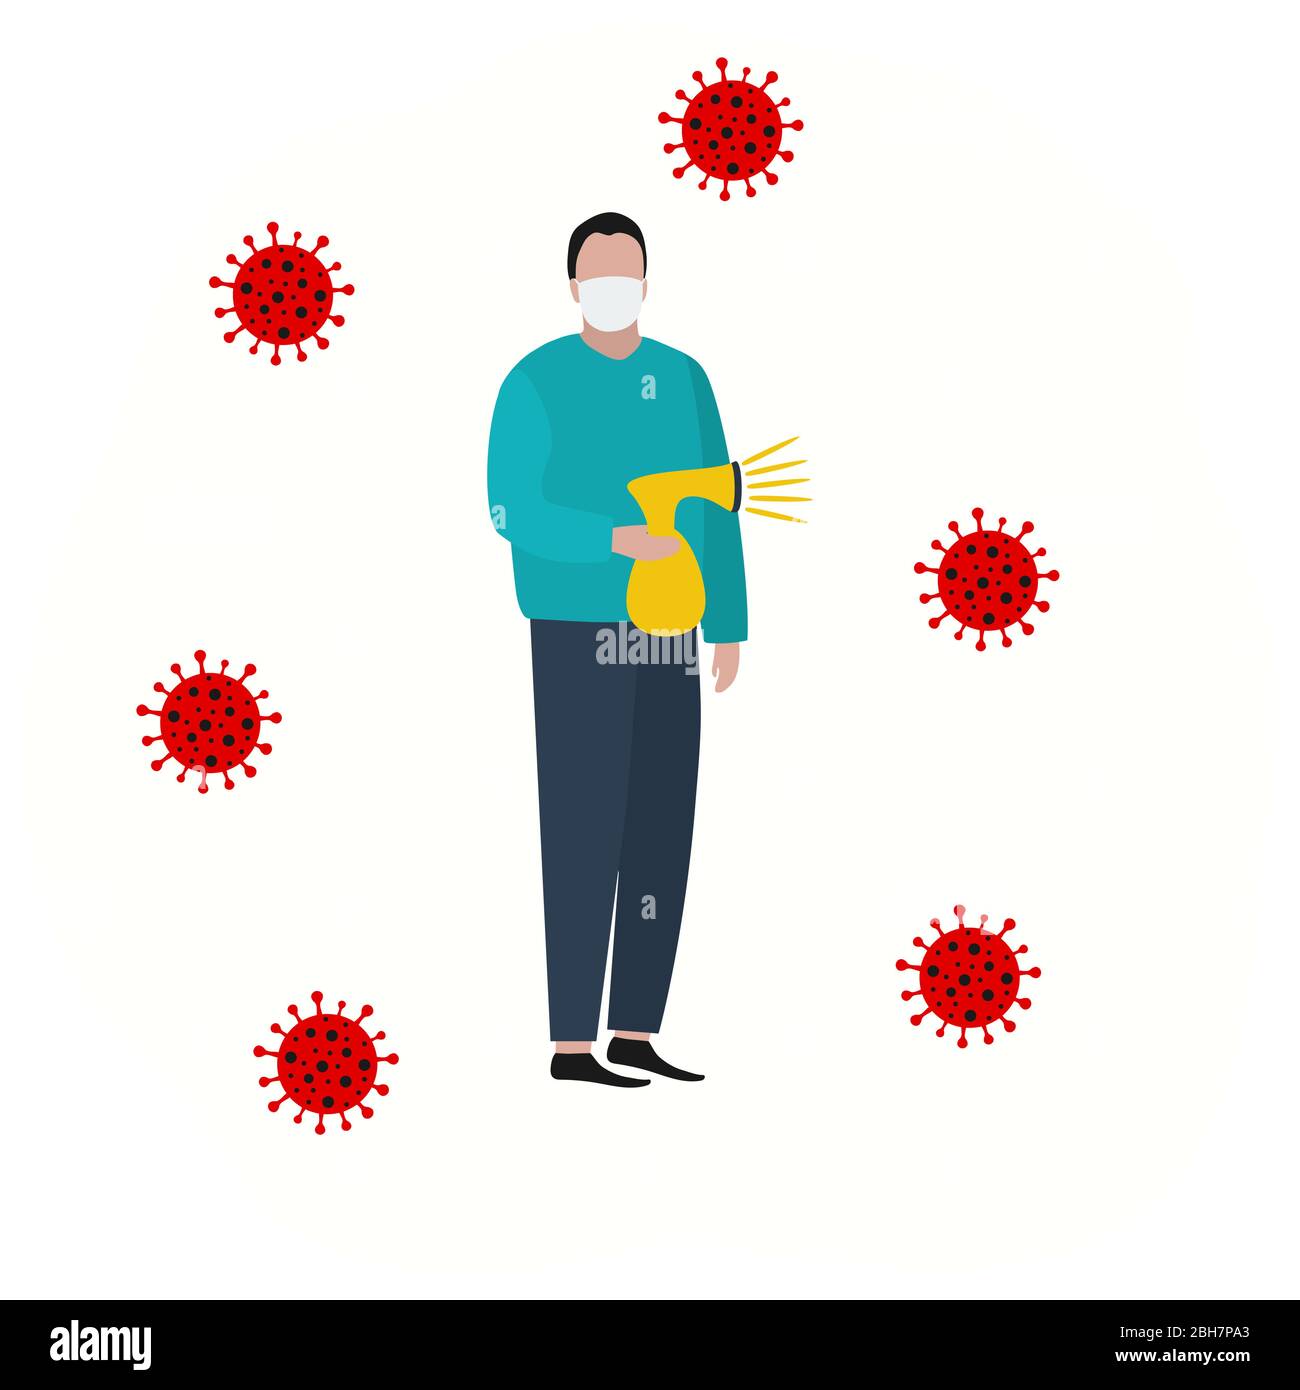 Man in a protective mask against viruses. Fashion trendy illustration, flat design. Pandemic and epidemic of coronavirus in the world Stock Vector